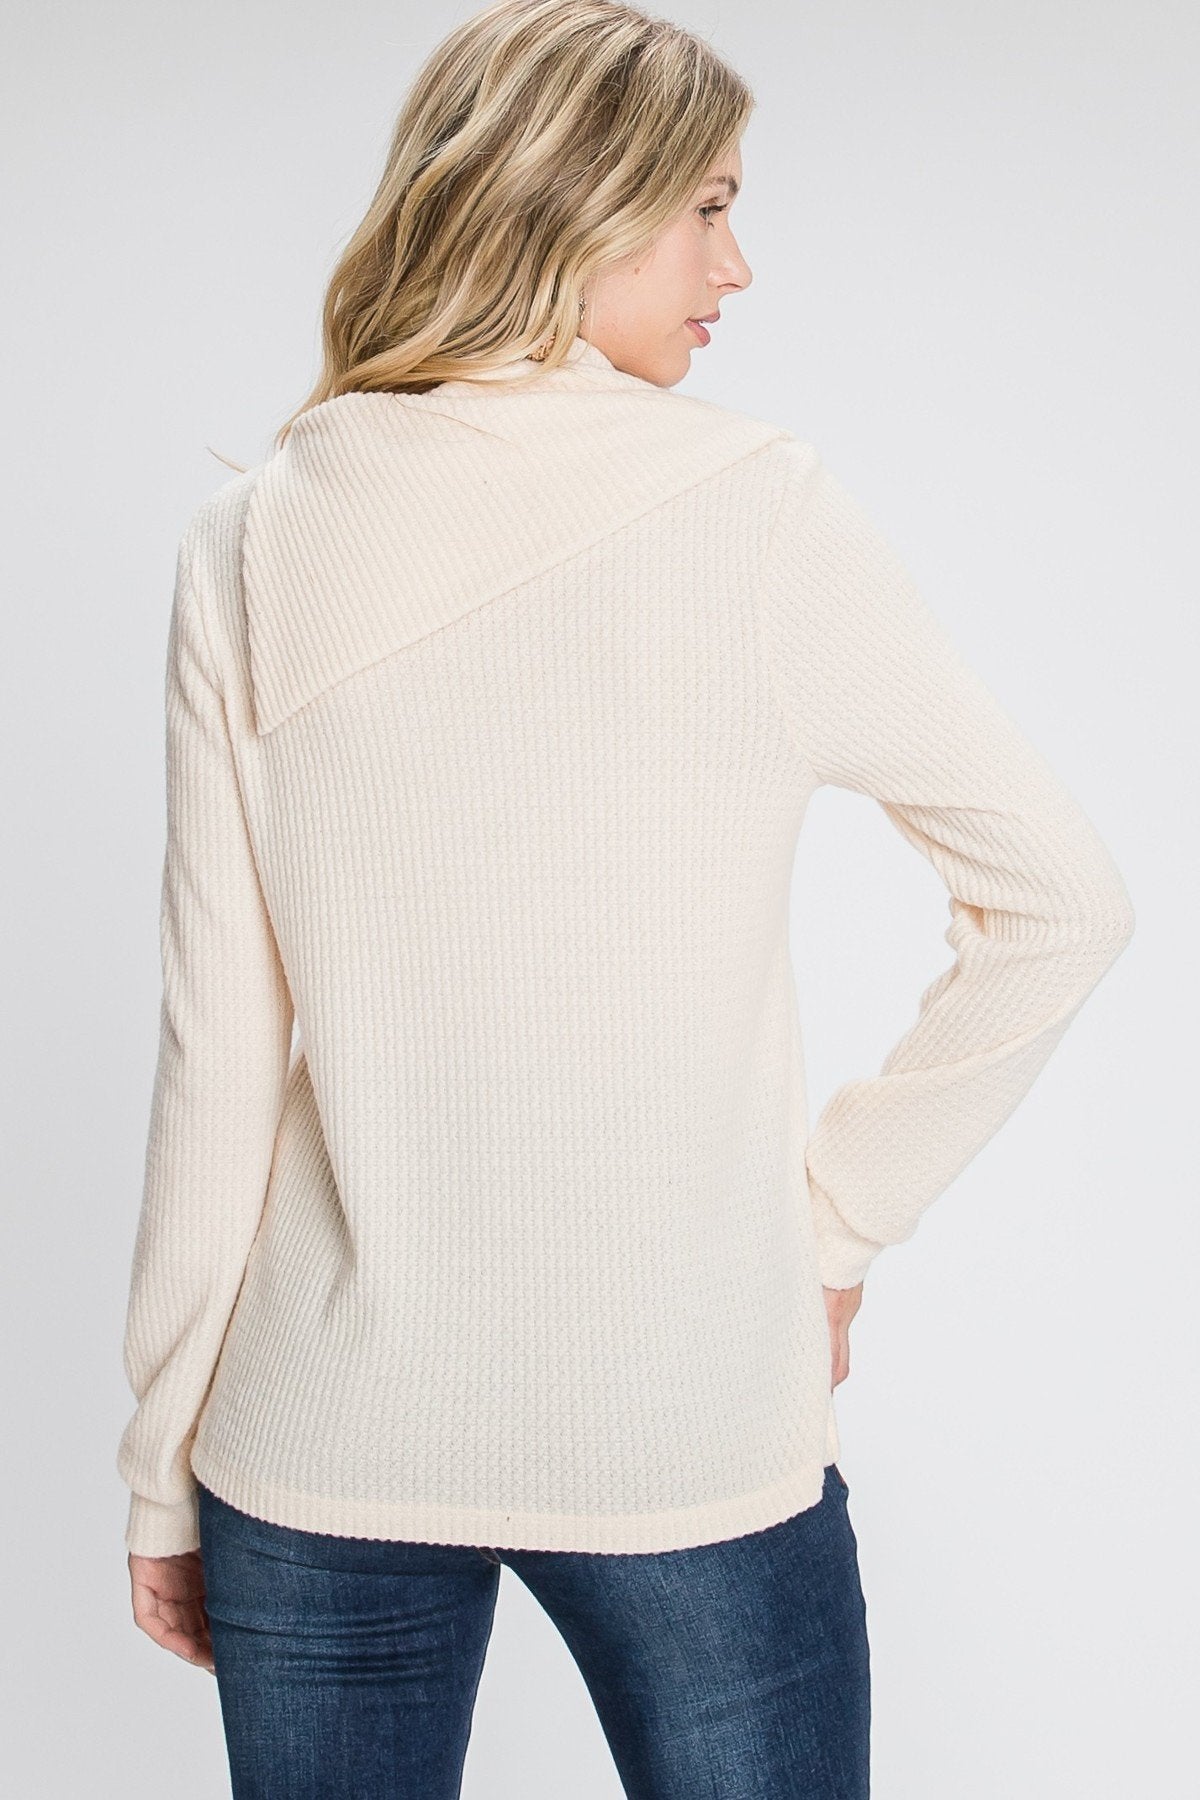 Buttoned Flap Mock Sweater